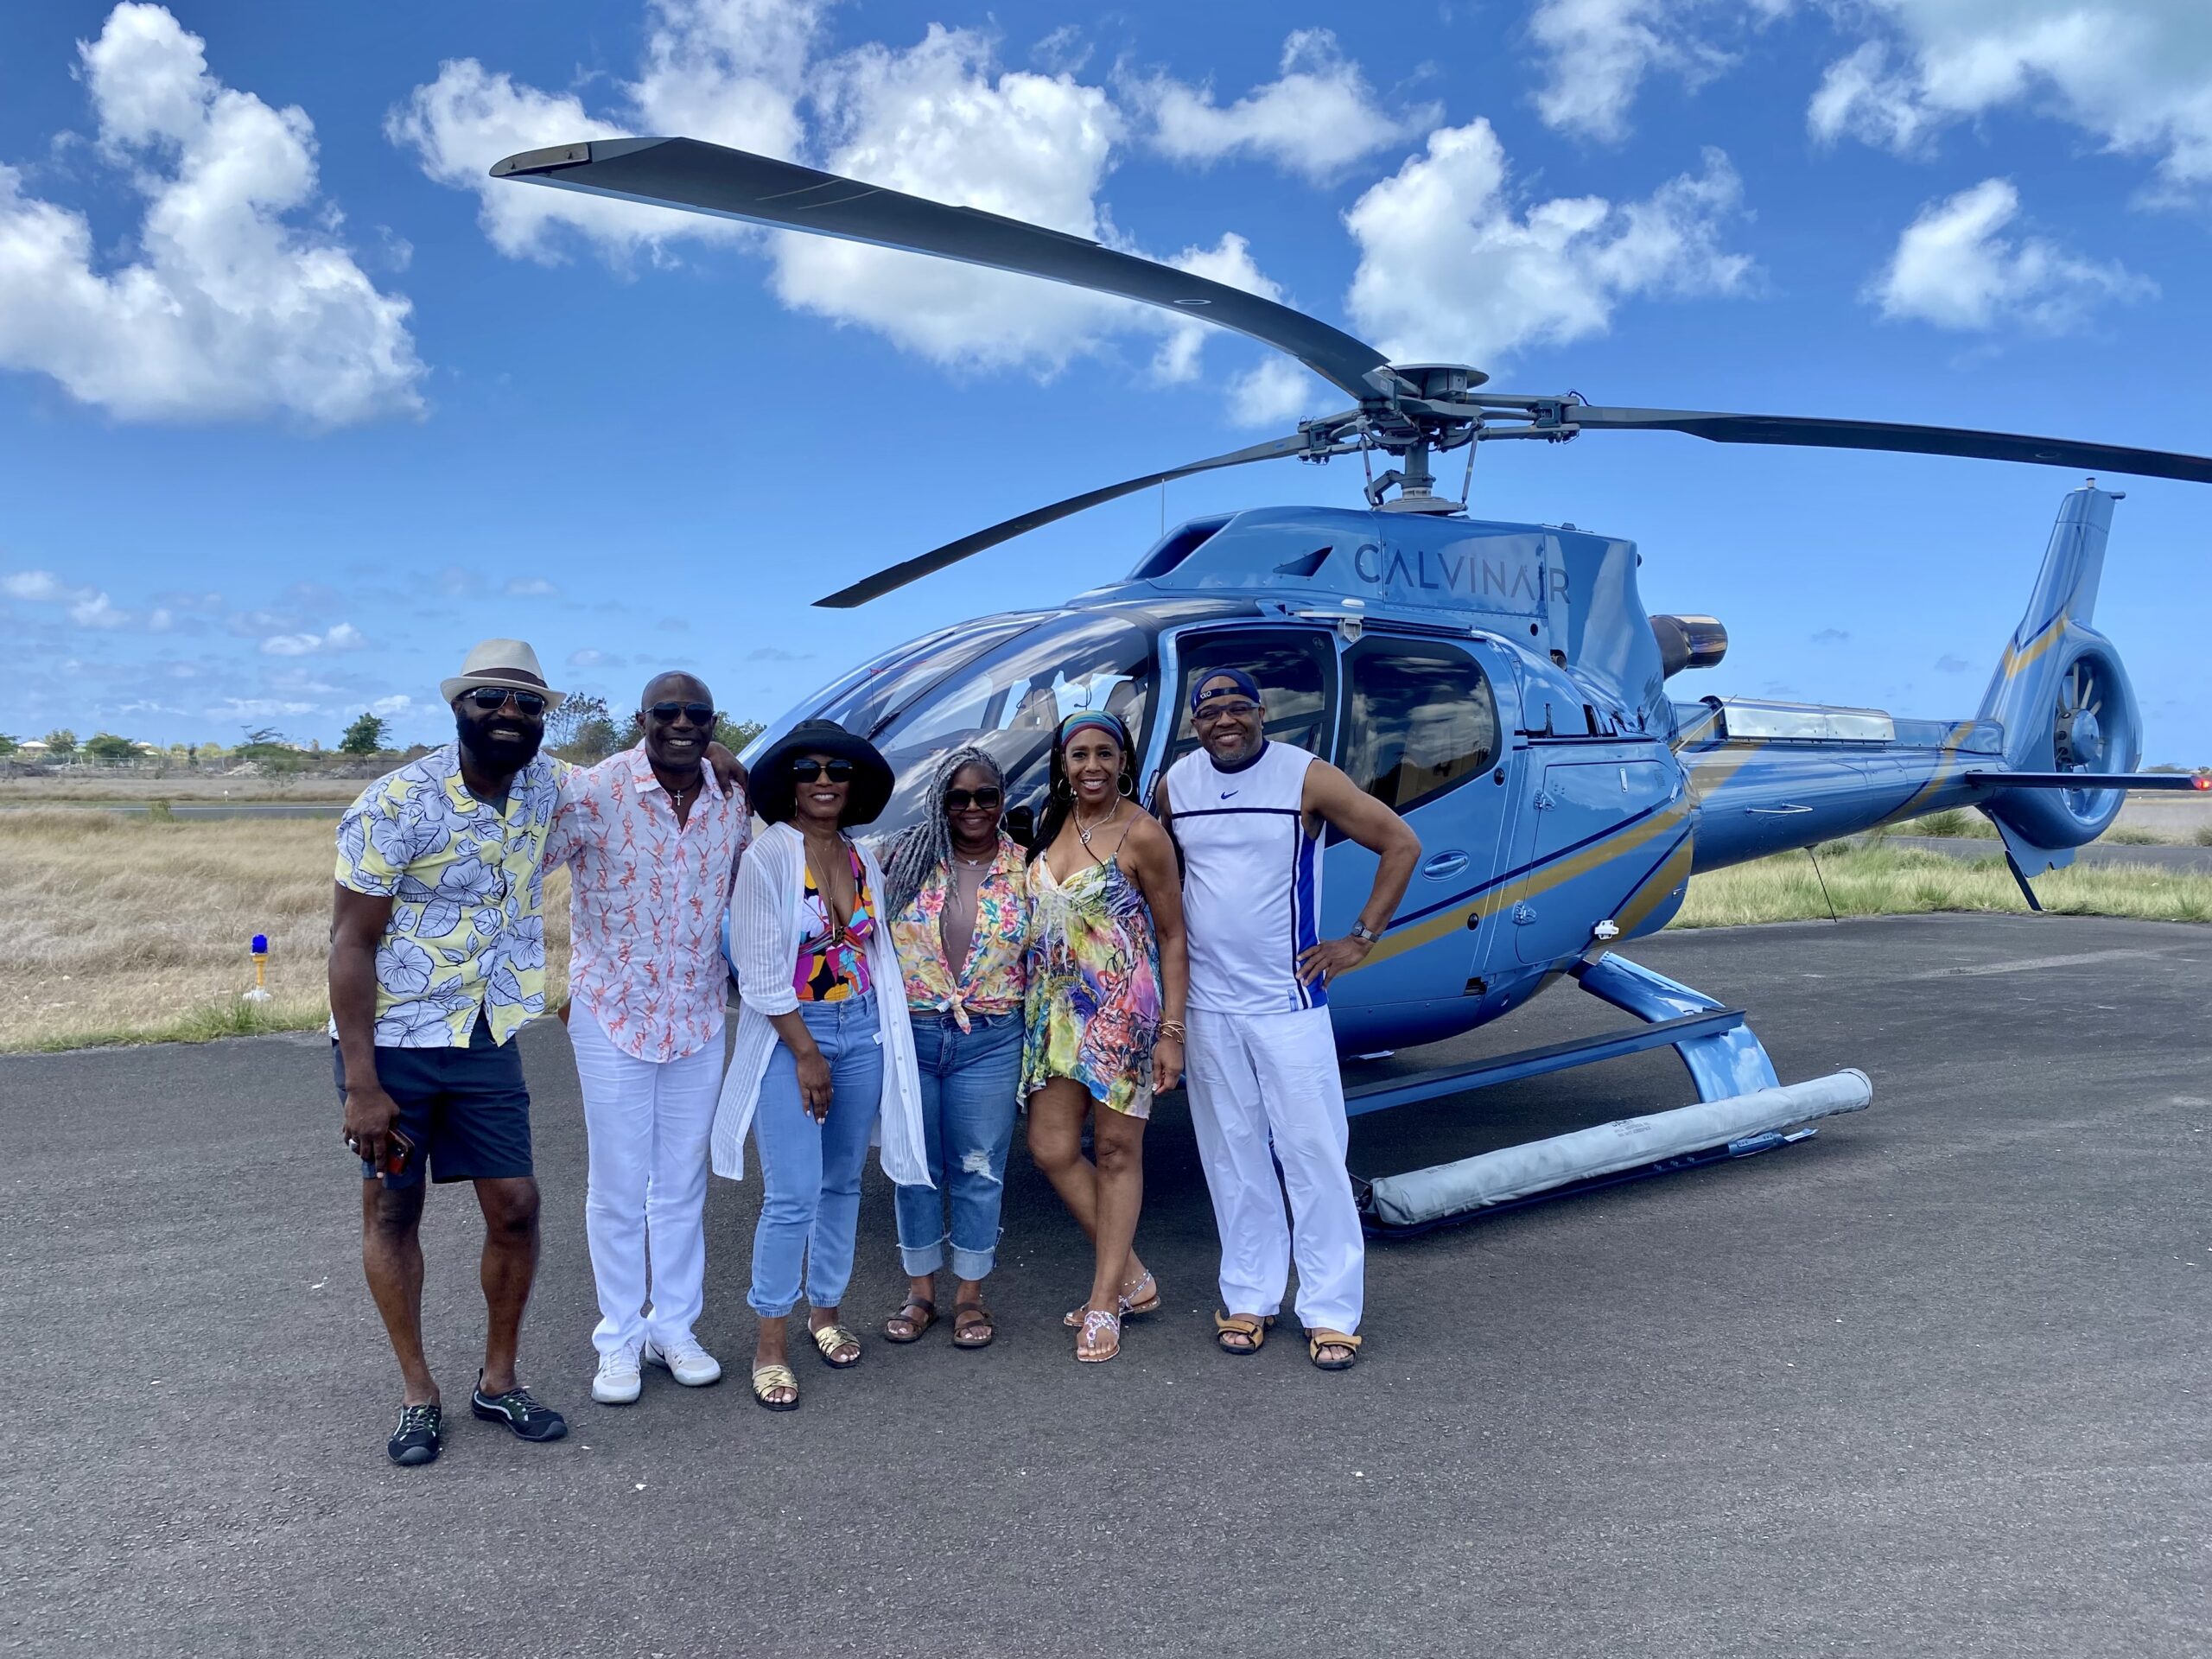 Antigua and Barbuda welcomes Angela Bassett to her shores